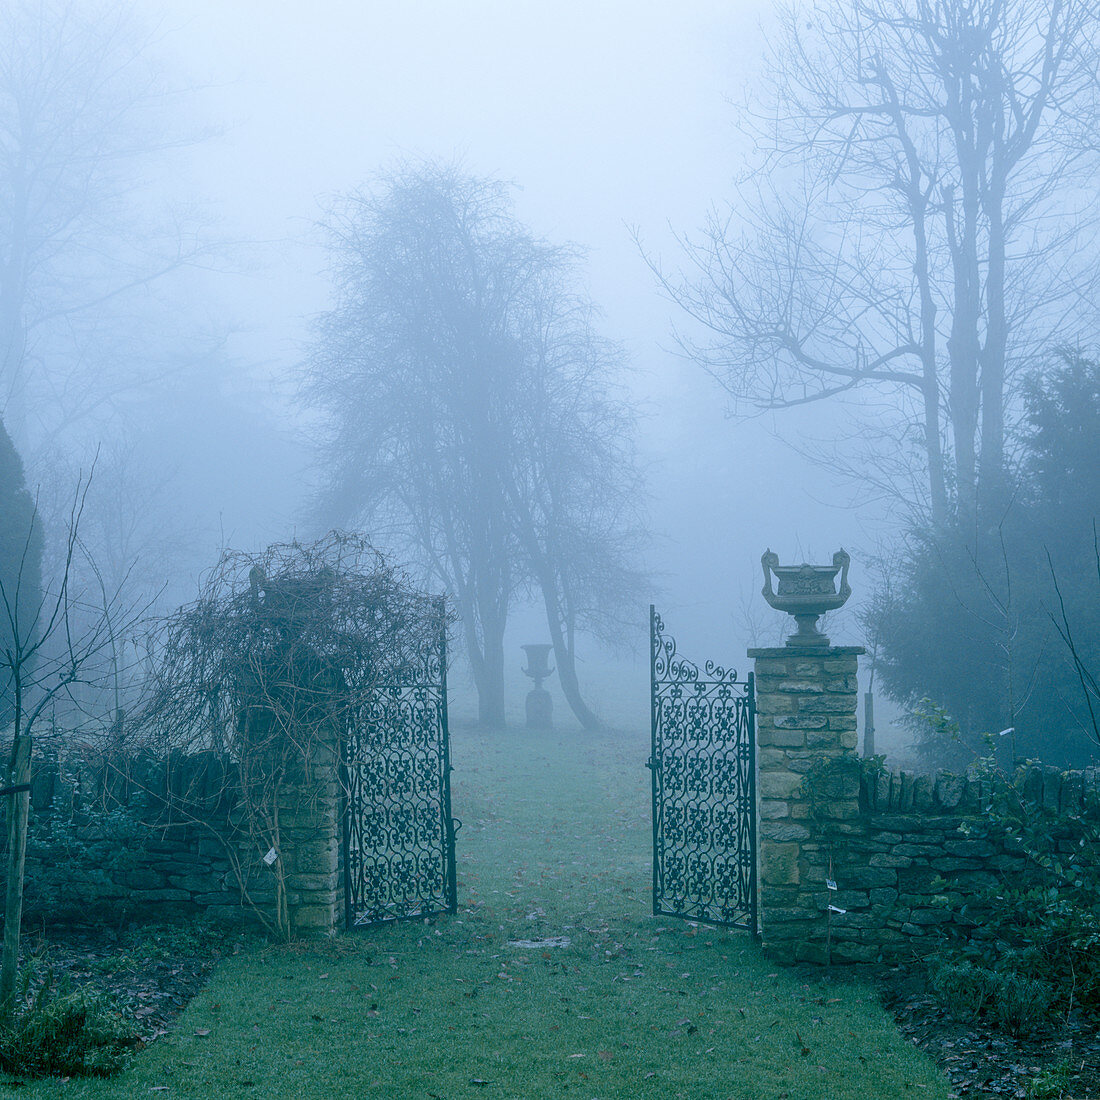 Misty atmosphere in park-like gardens with open wrought iron gate